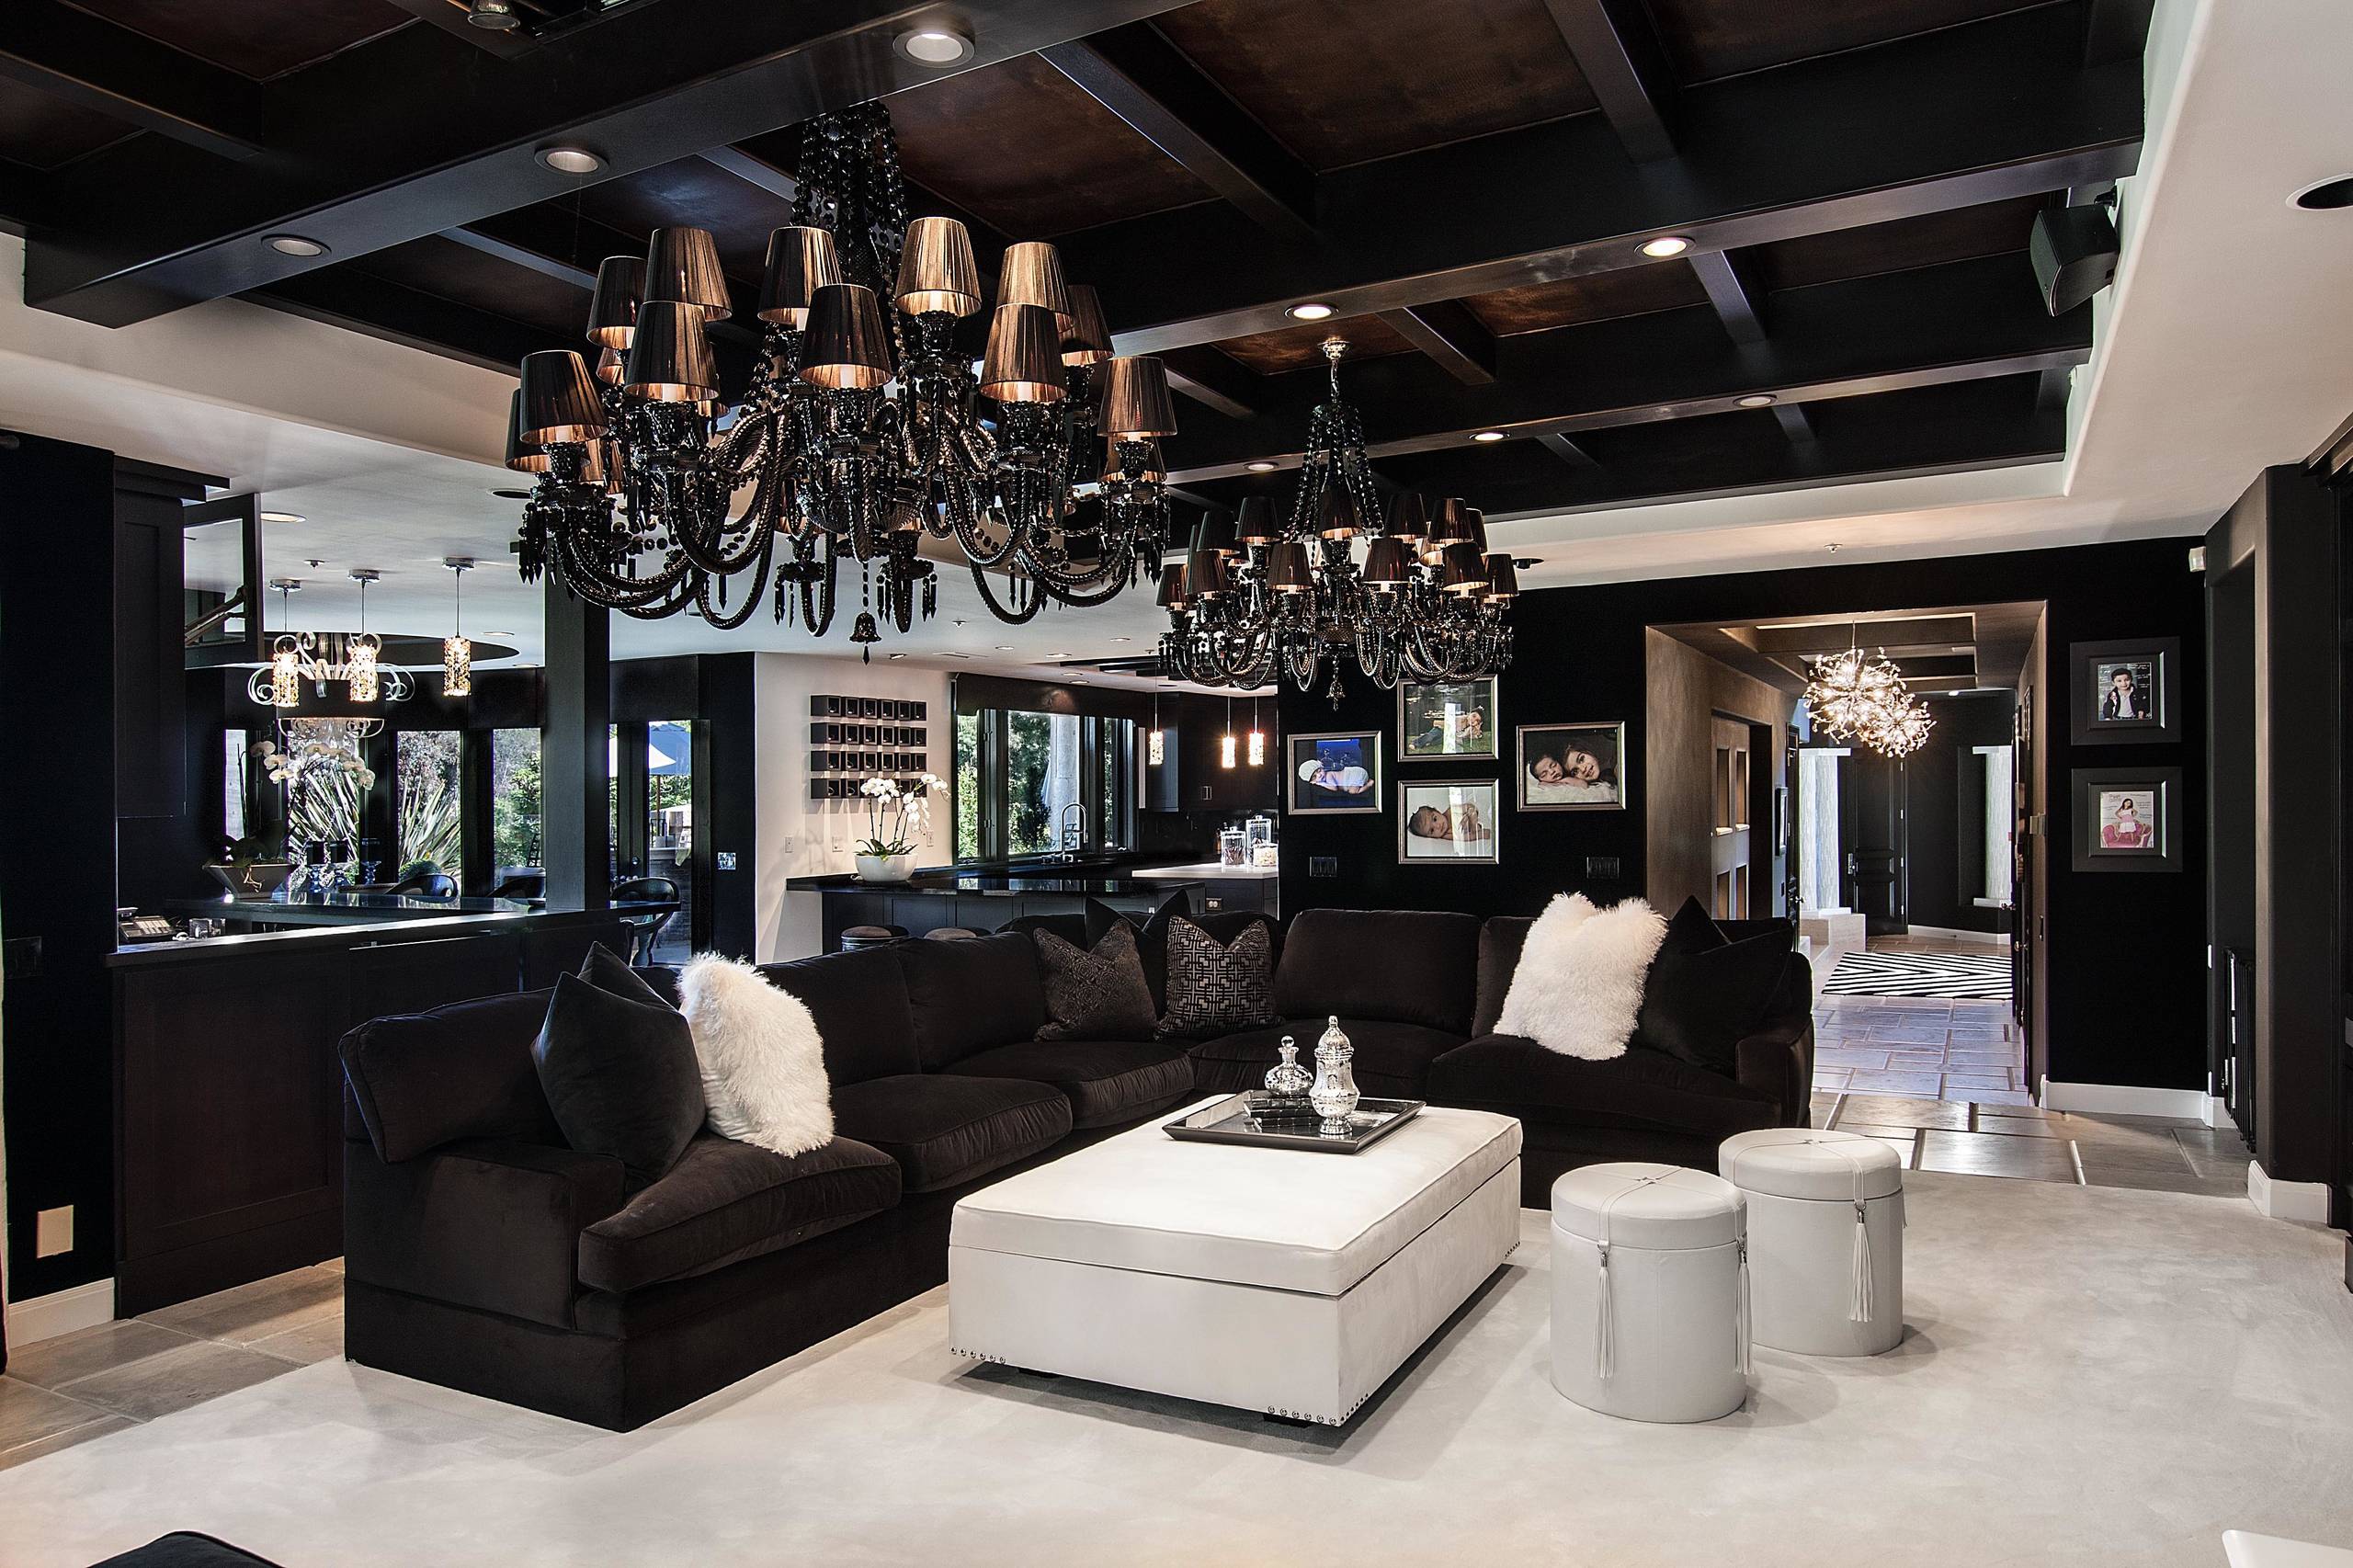 Black Sectional Houzz, Black Sectional Living Room Ideas